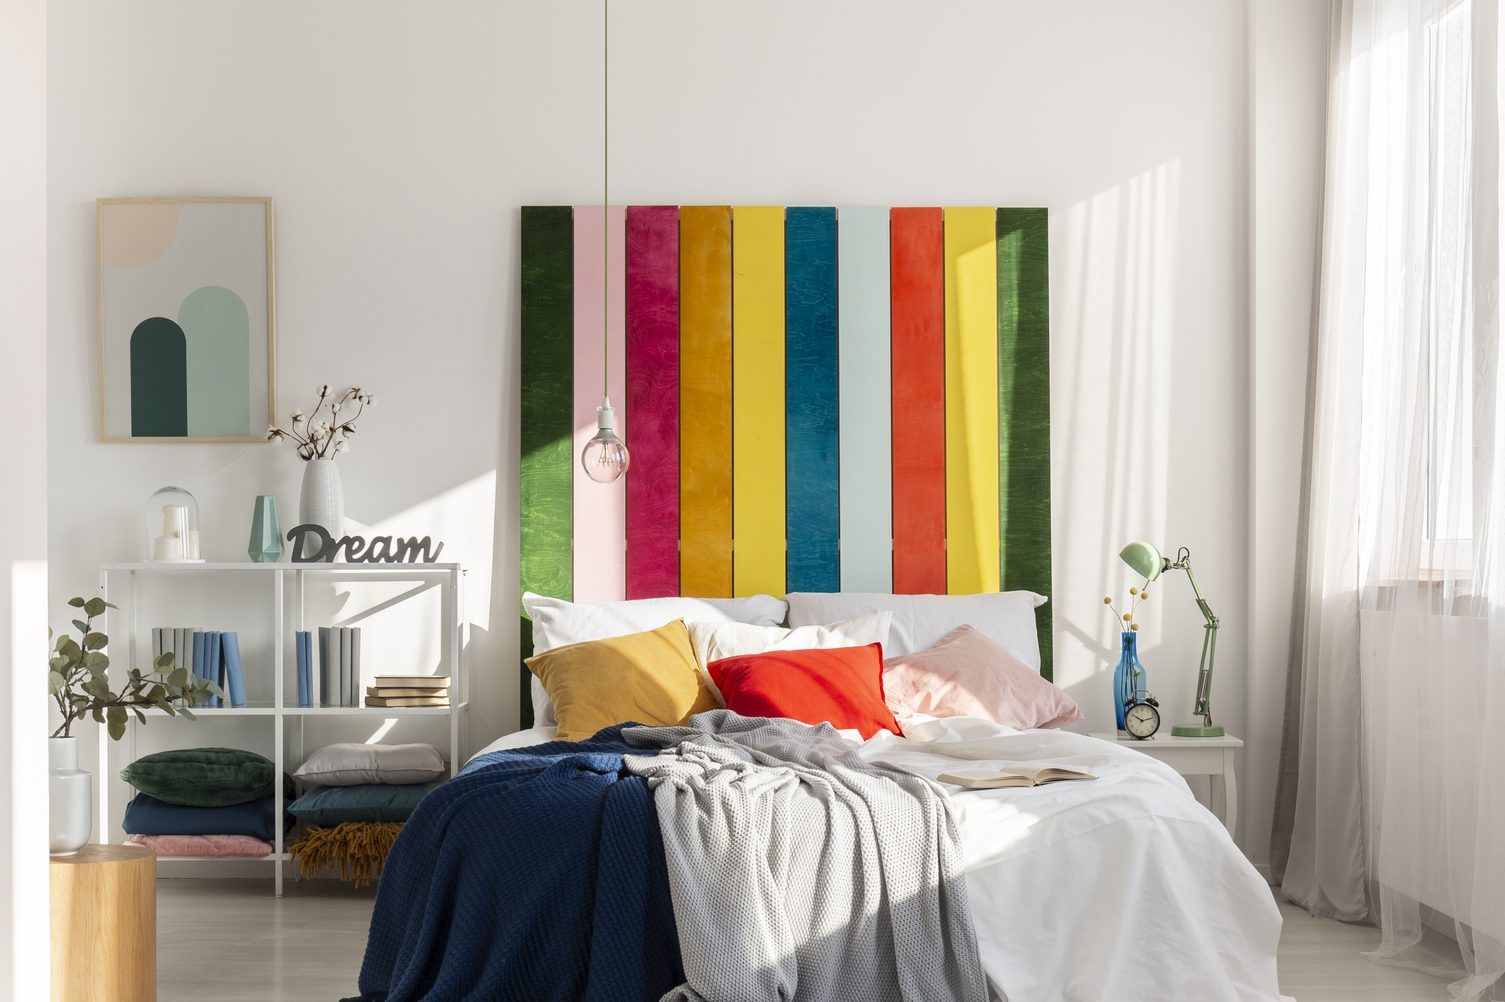 Colorful bedroom interior with rainbow colored bedhead